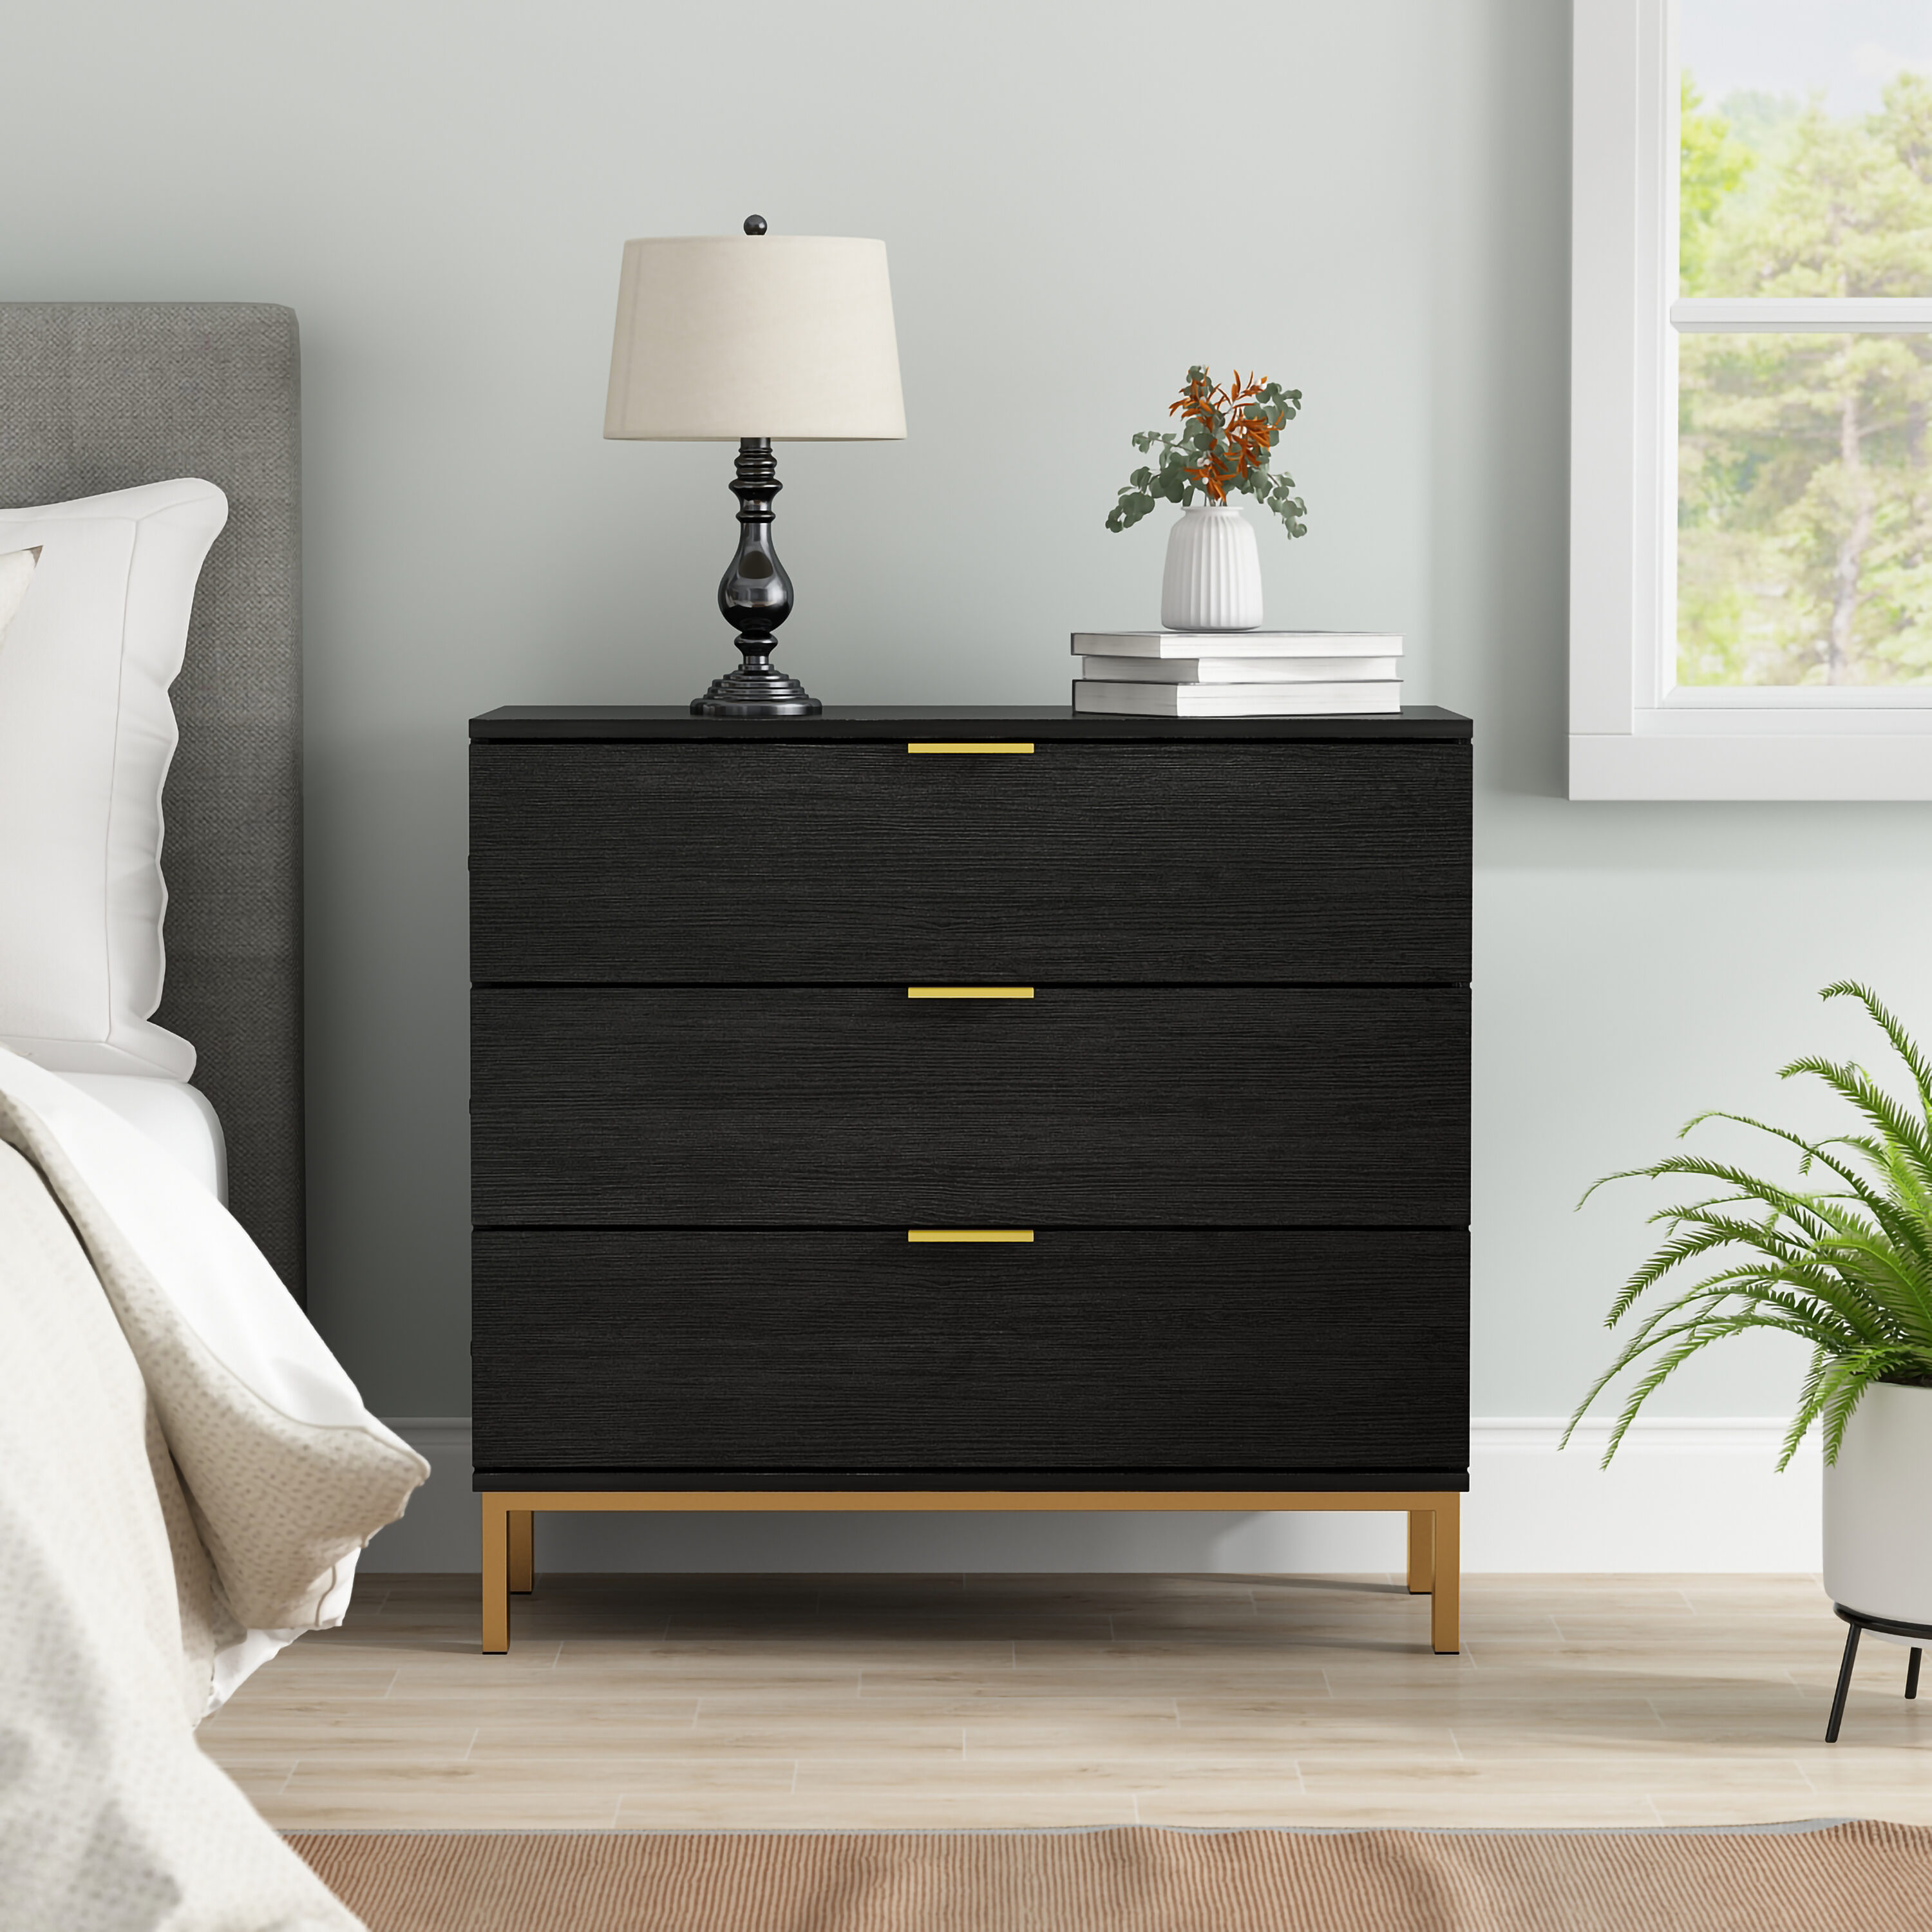 FUFU&GAGA Contemporary Black 3-Drawer Chest with Steel Frame and